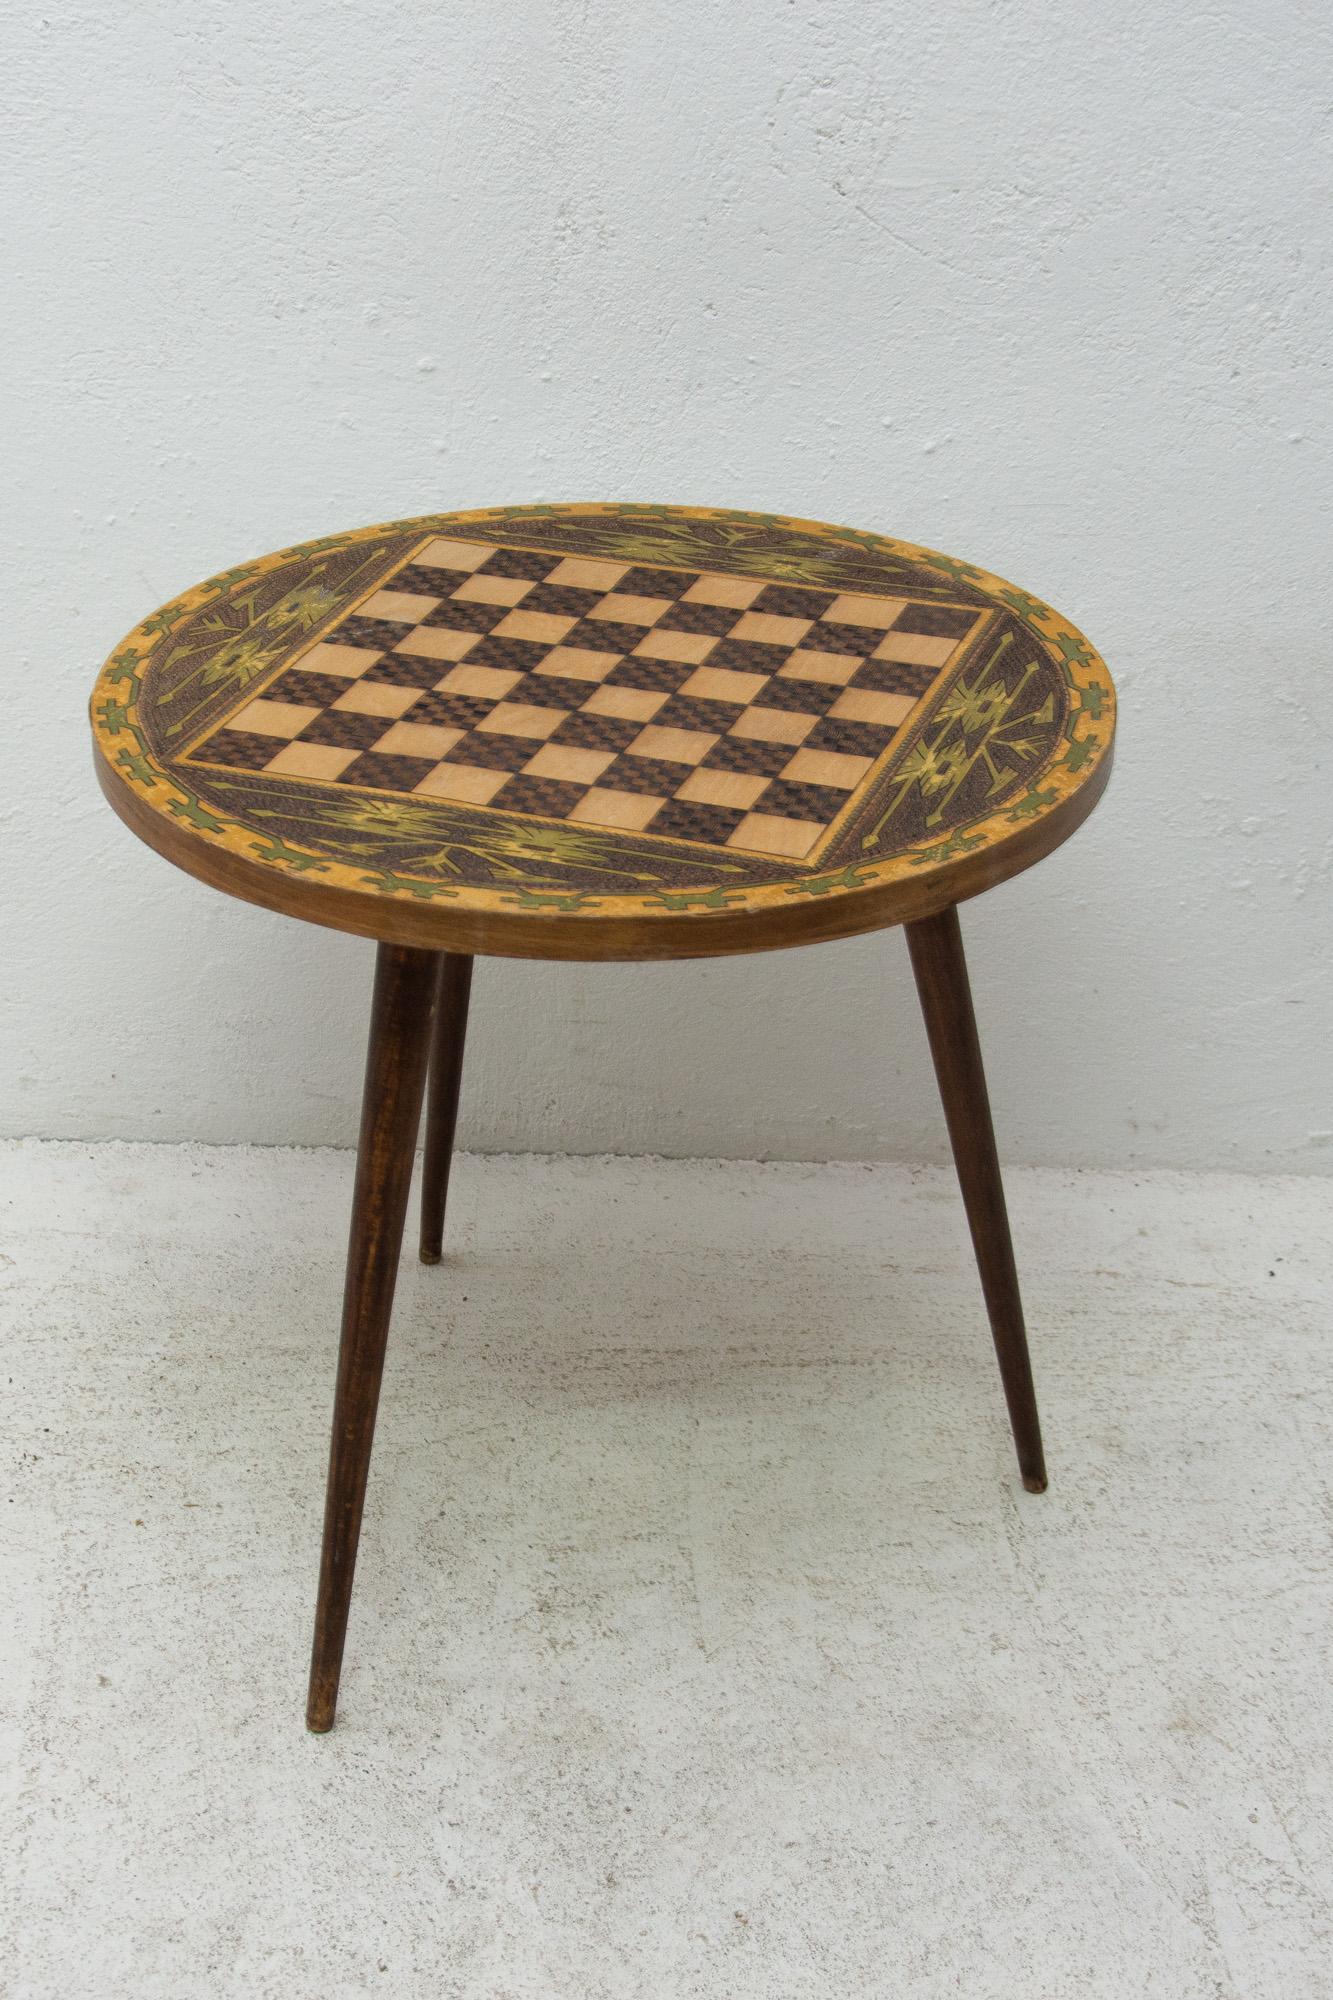 Albanian Vintage Round Side Table with Chess Pattern, 1970s, Albania